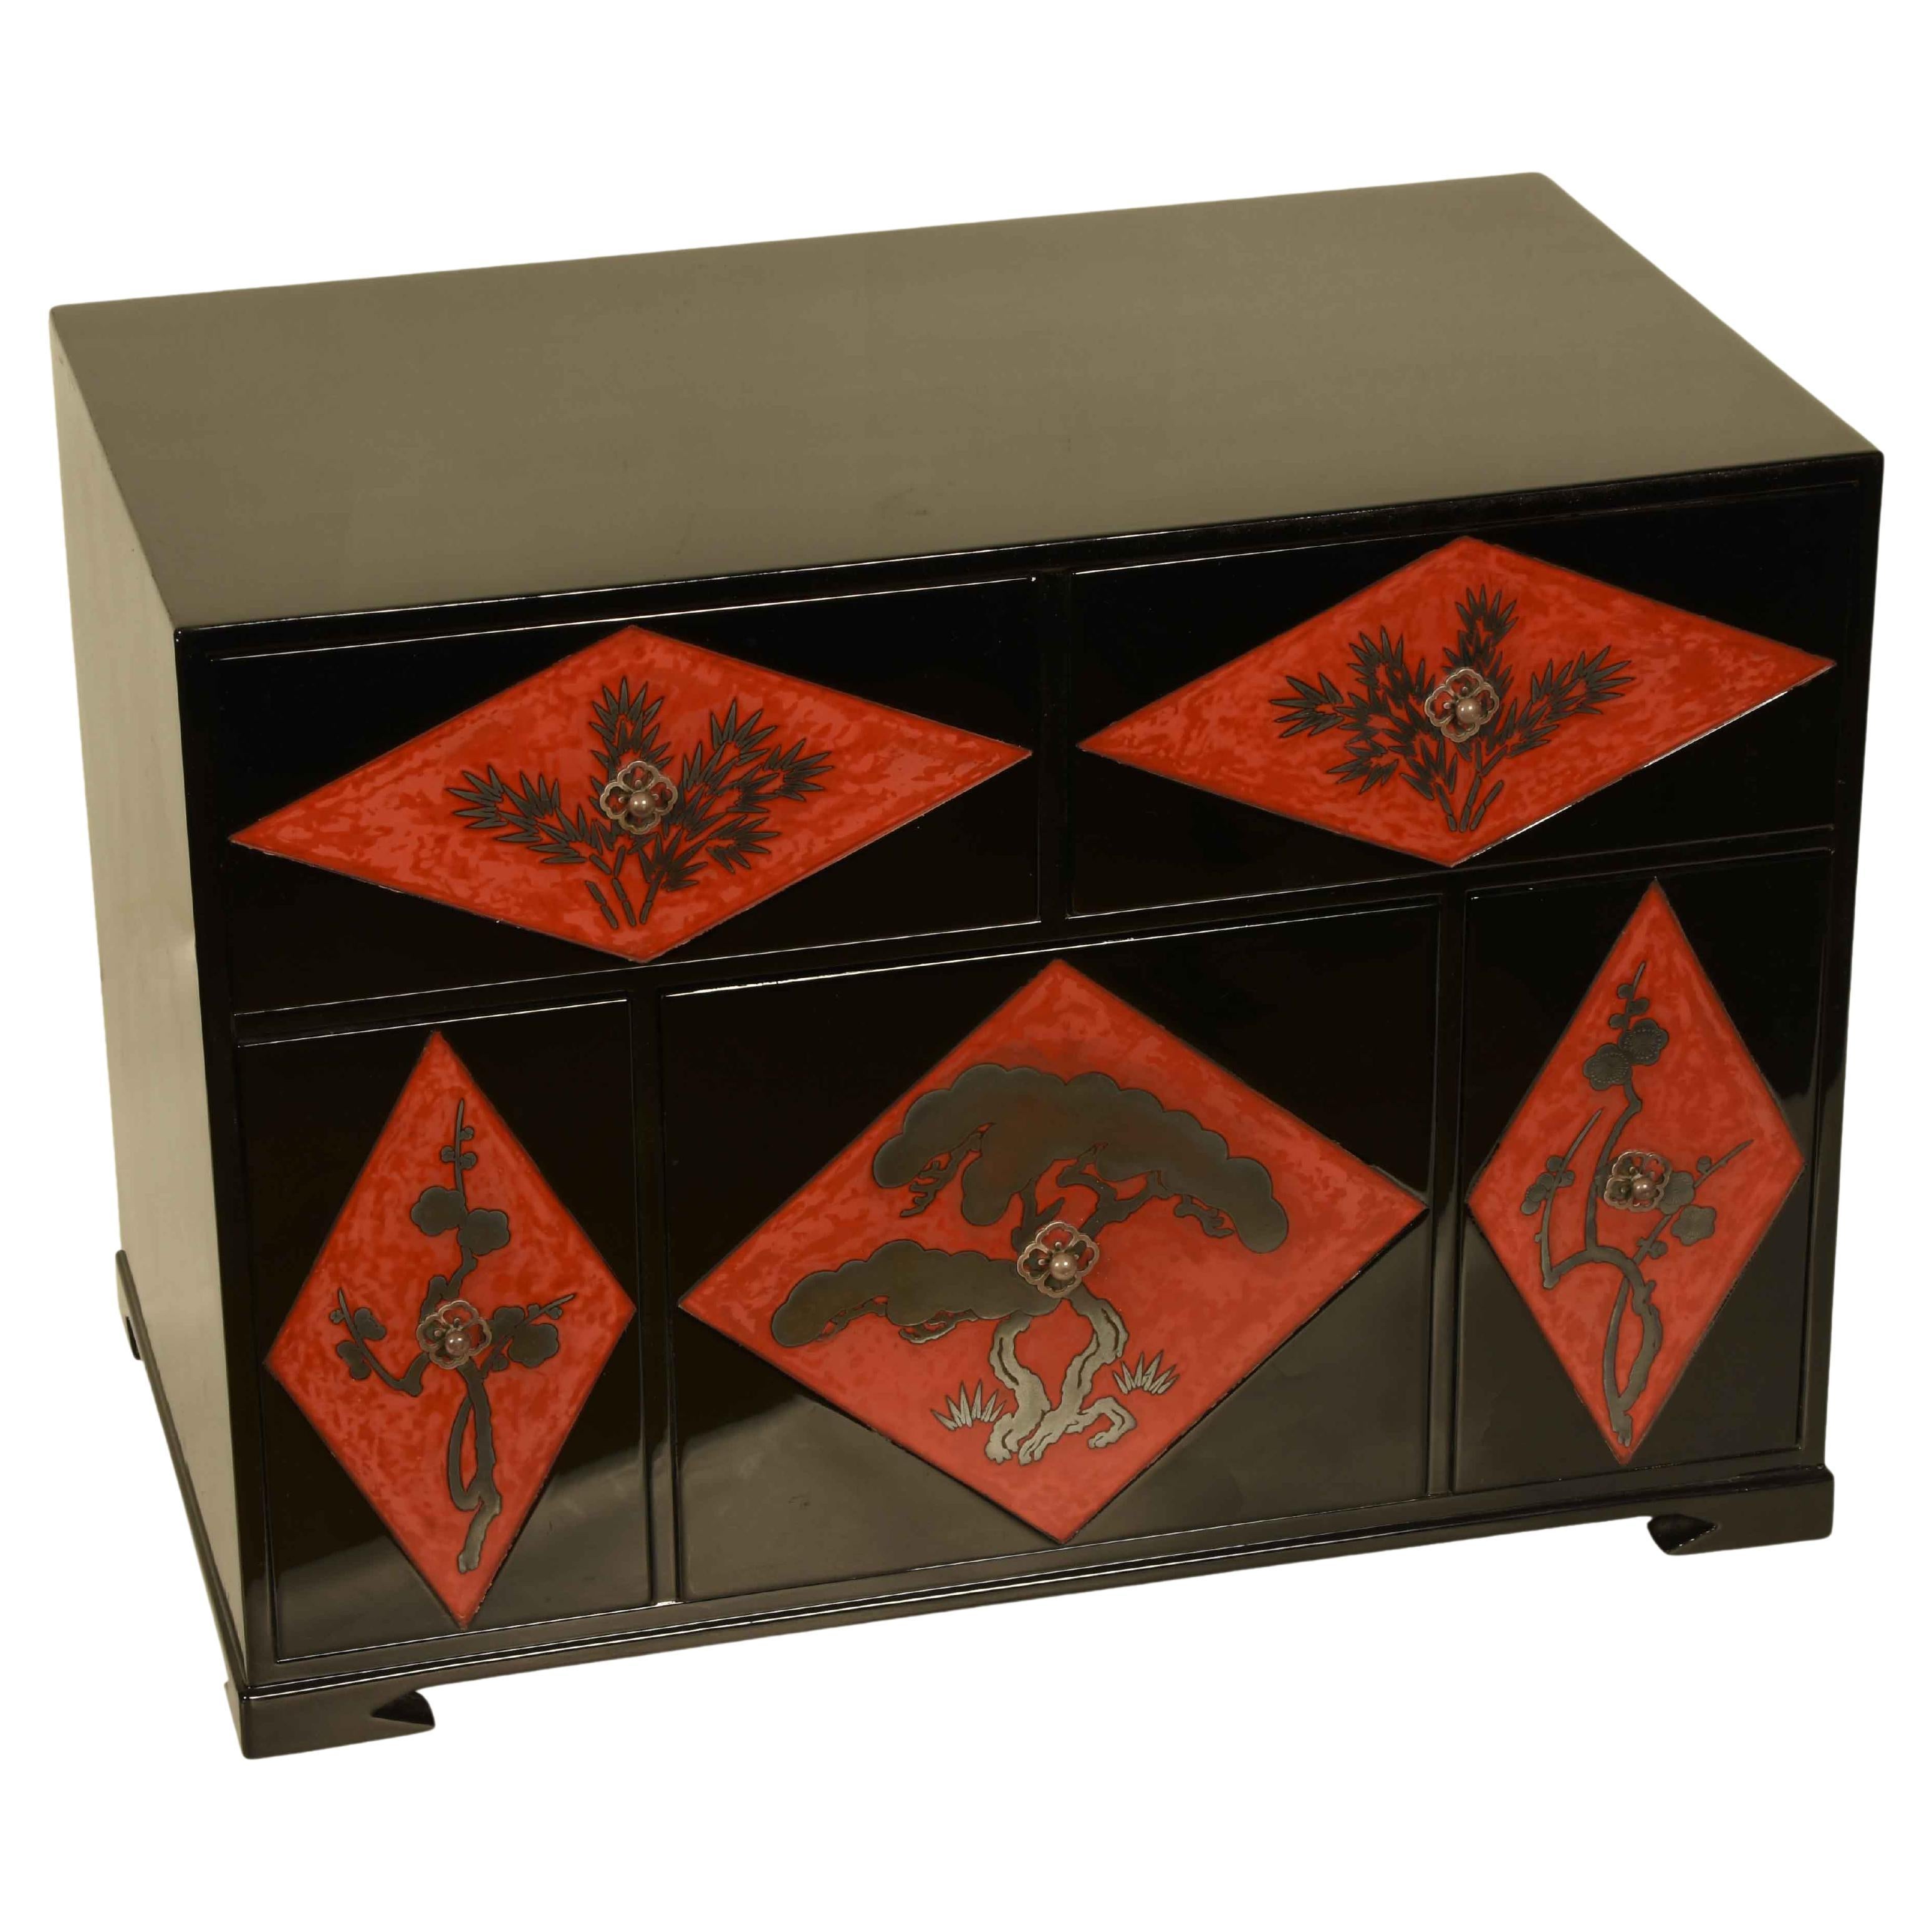 Japanese Red and Black Lacquer Chest with Silver Maki E Design, Taisho Period